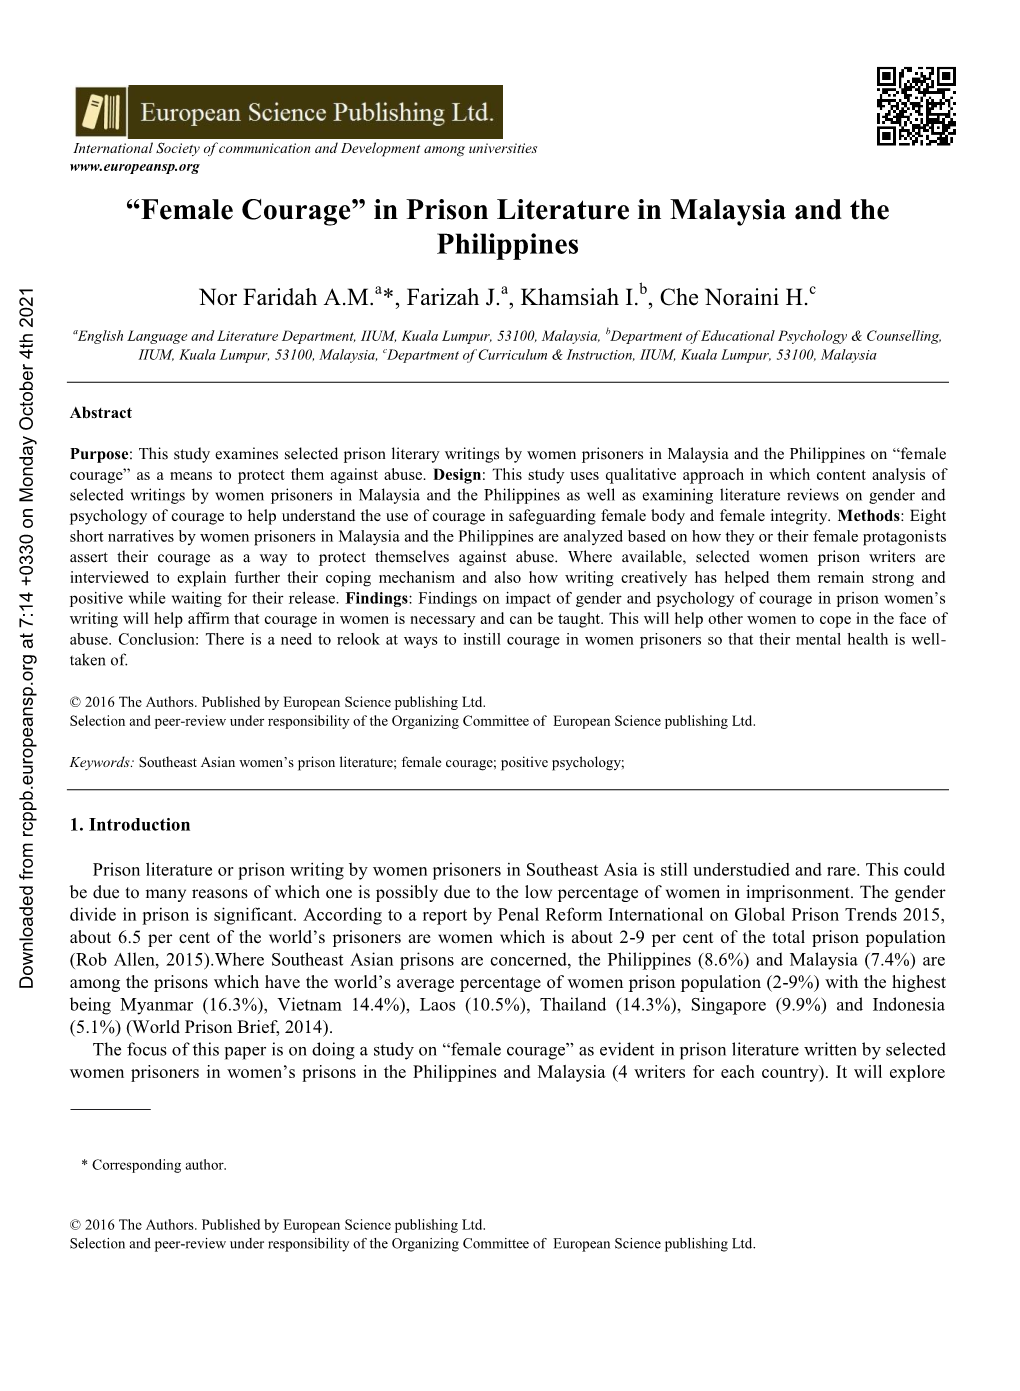 “Female Courage” in Prison Literature in Malaysia and the Philippines